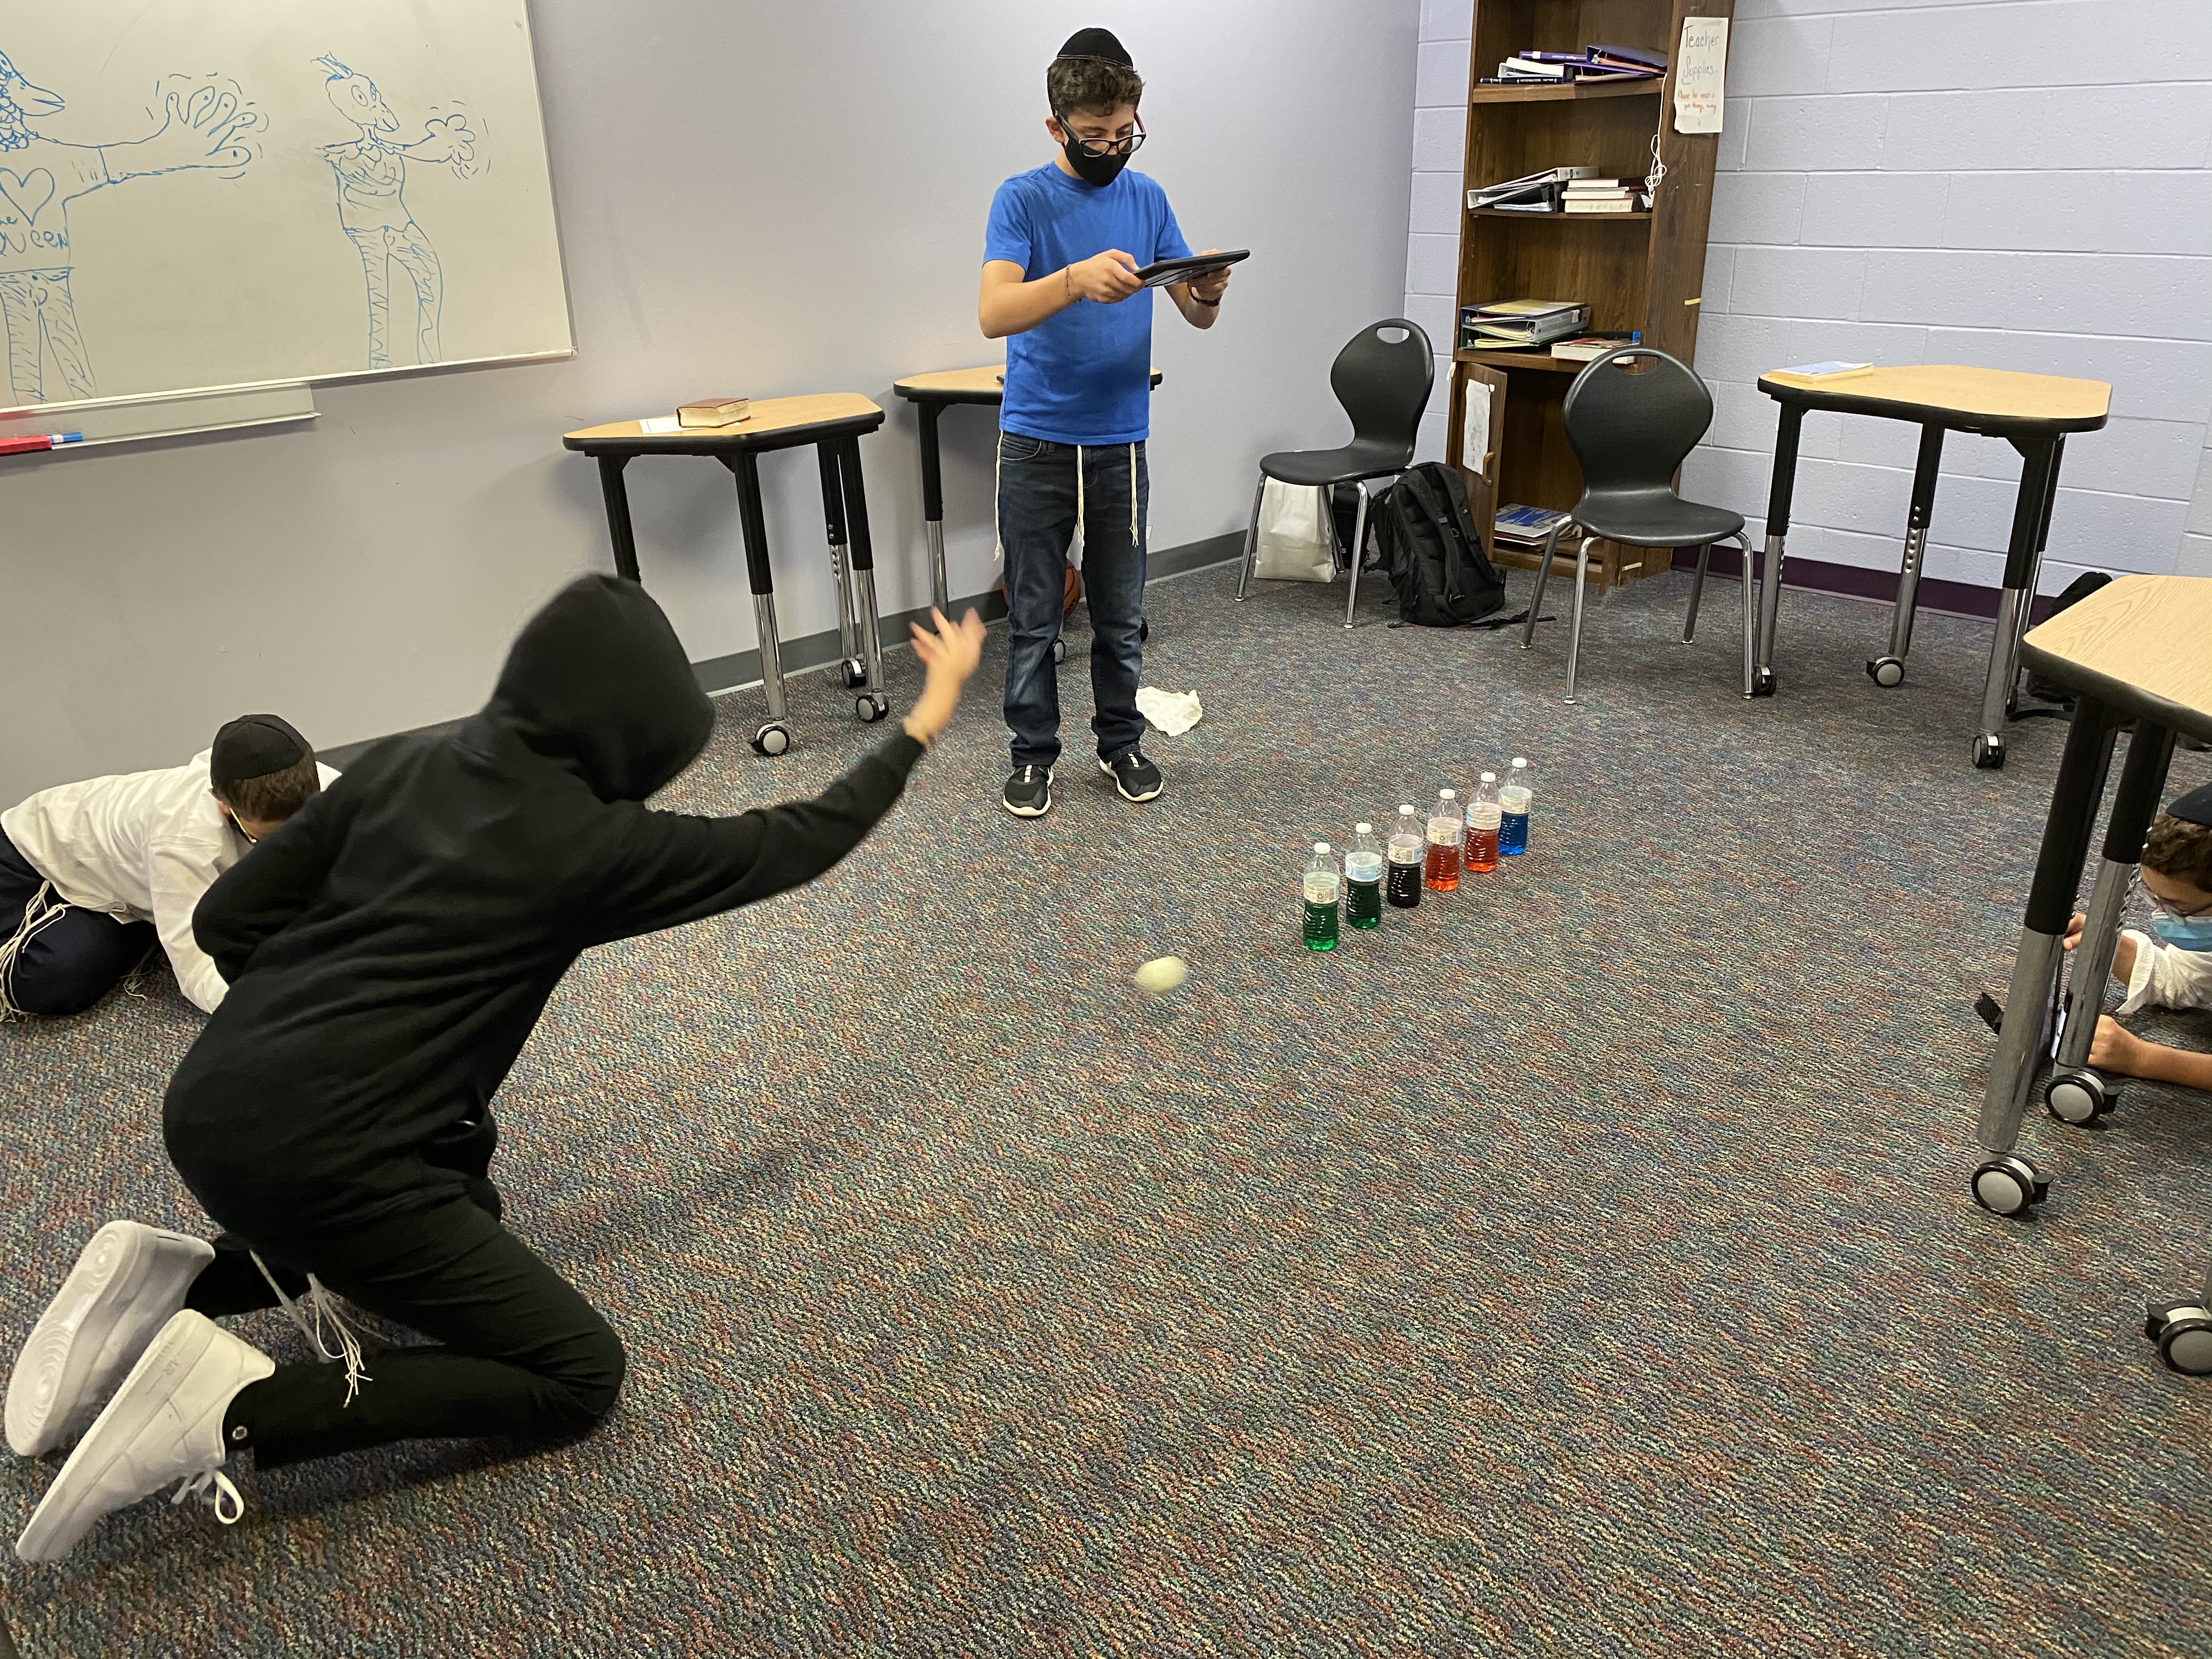 Water bottle bowling to show balanced and unbalanced forces